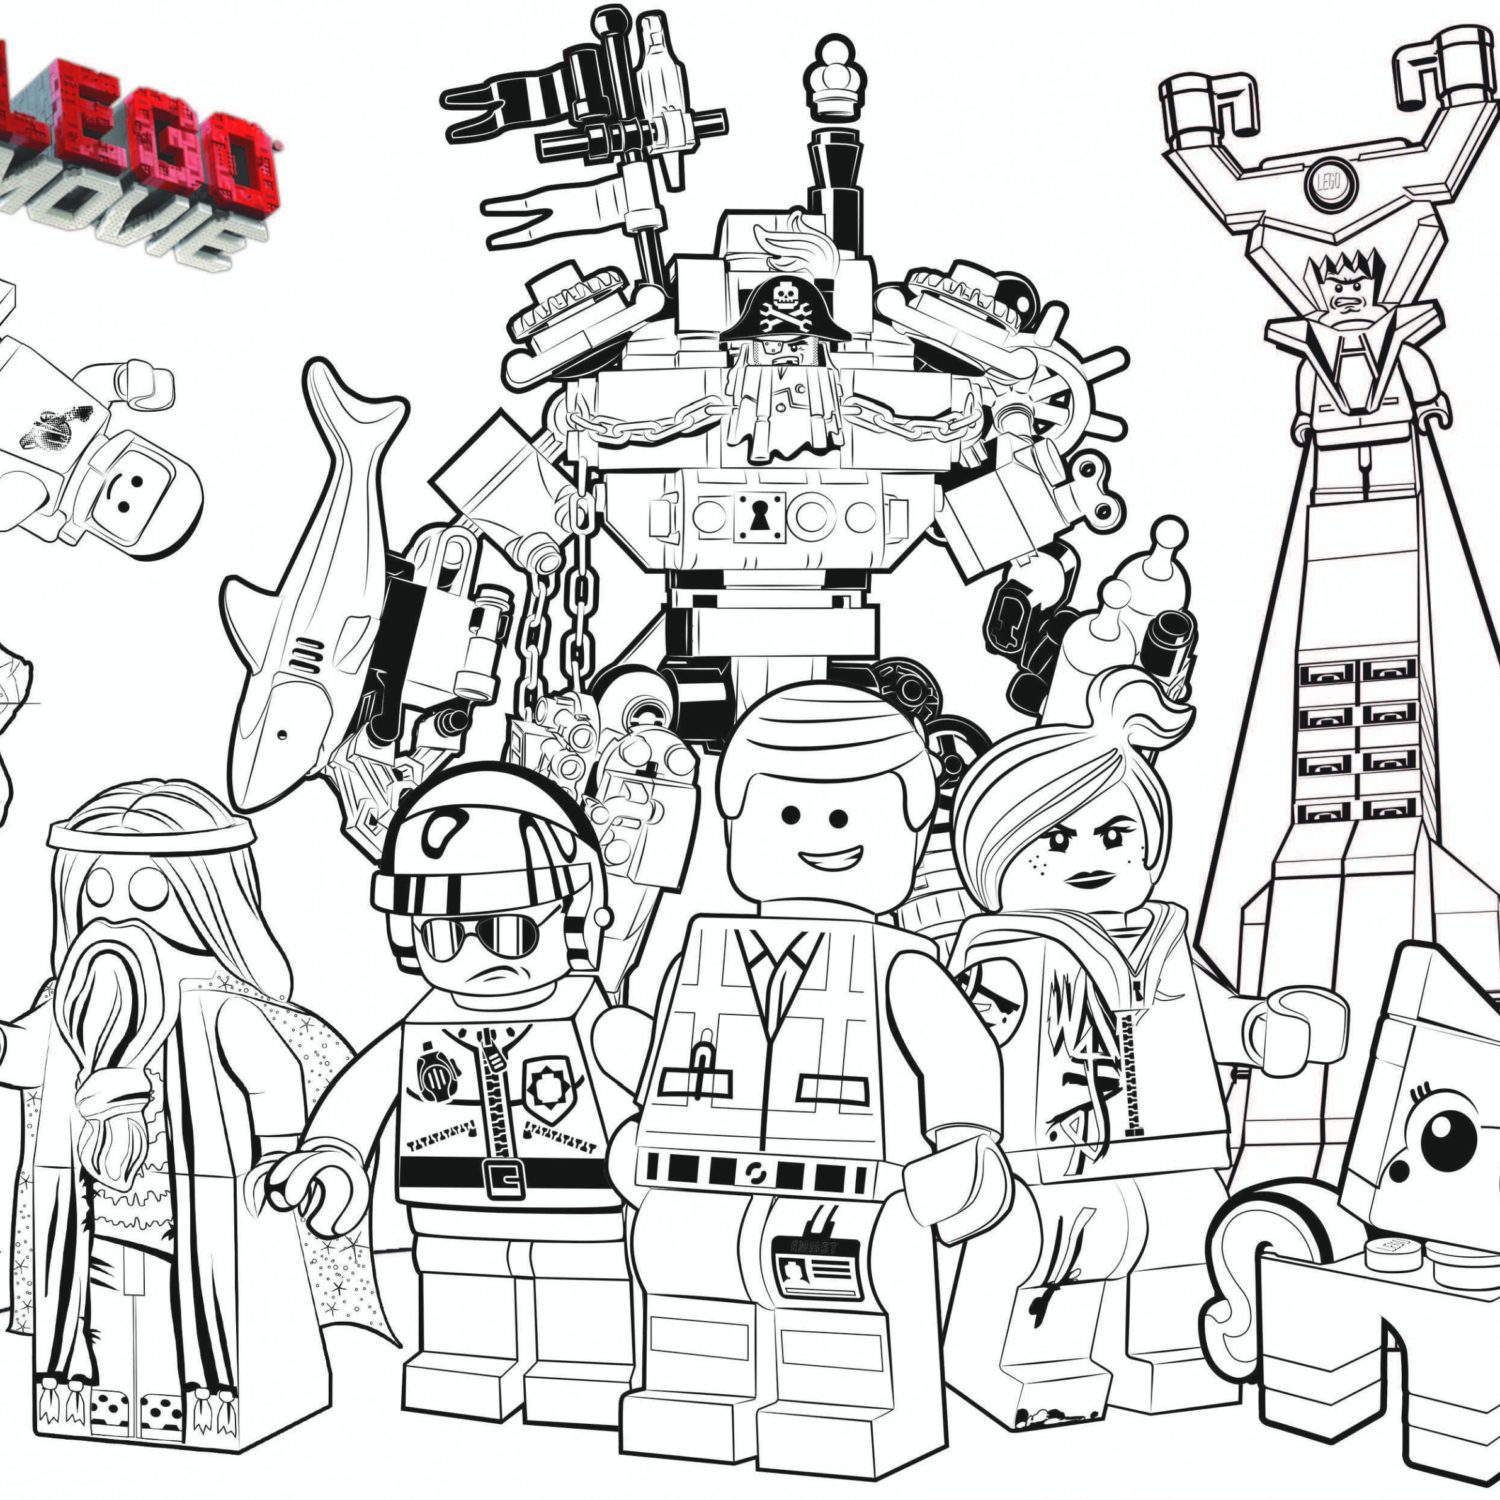 Lego Justice League Coloring Pages at GetColorings.com | Free printable